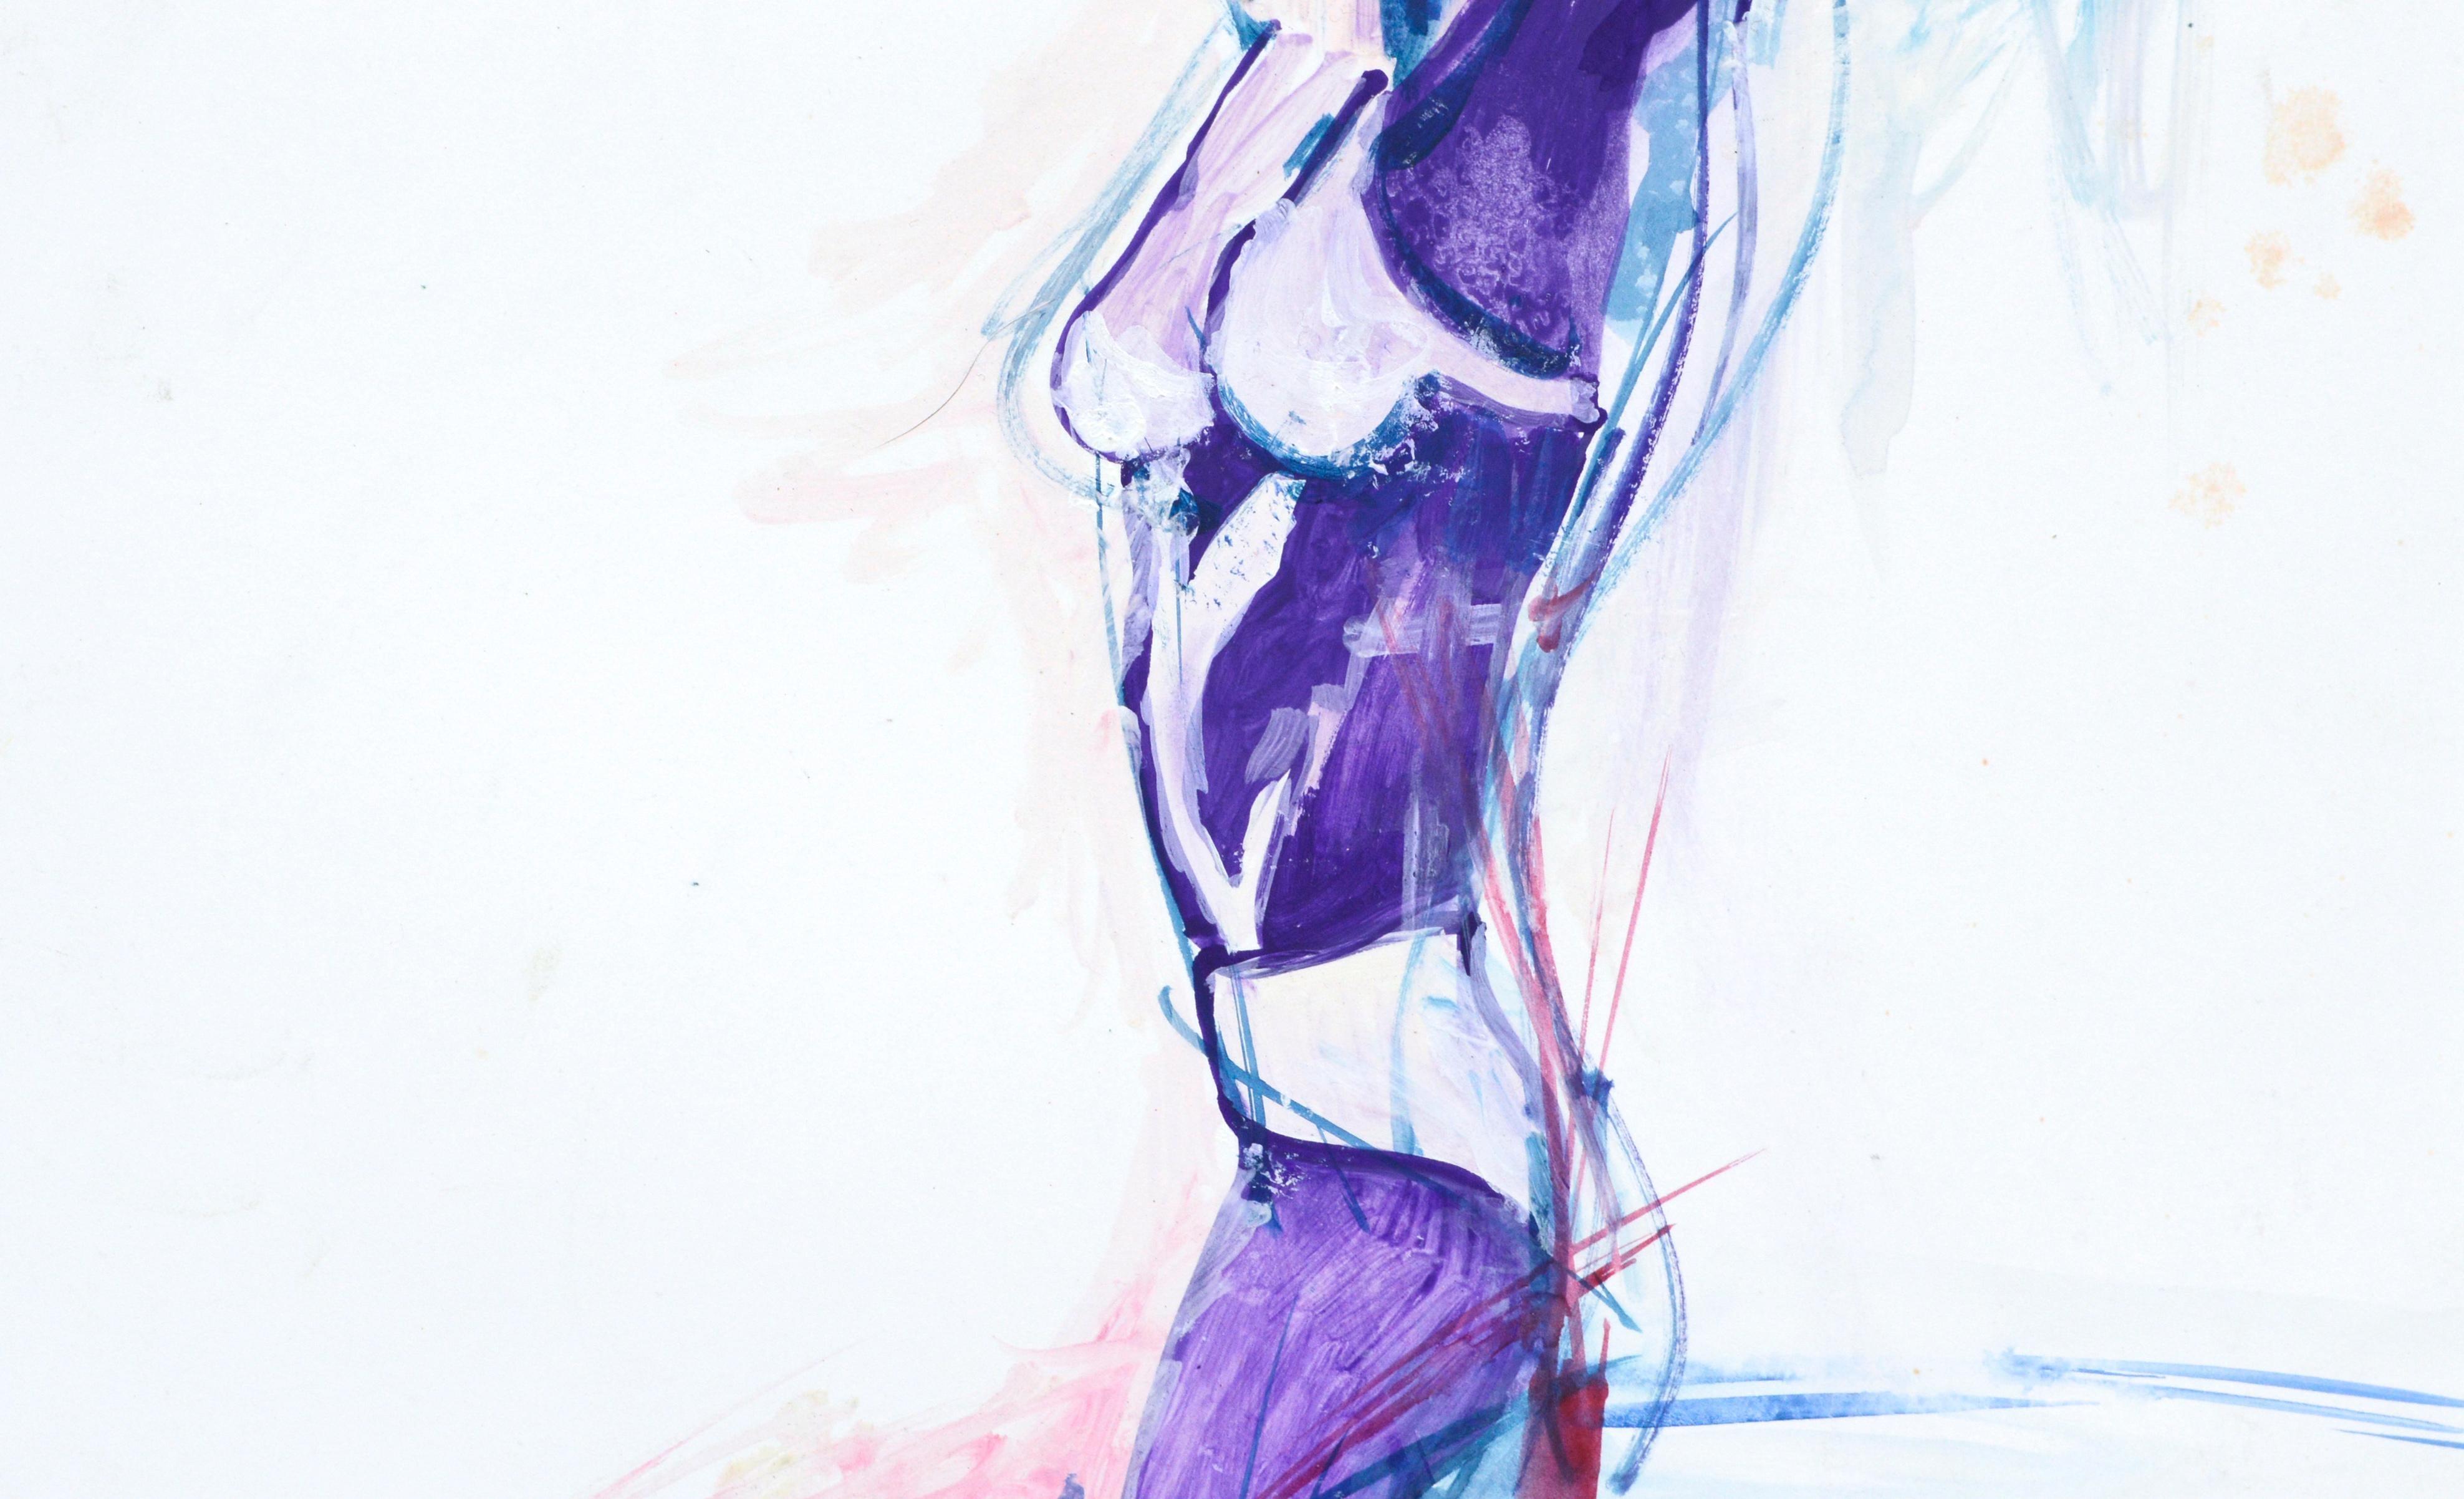 Abstracted Female Figure in Purple  - Blue Figurative Painting by Michael William Eggleston